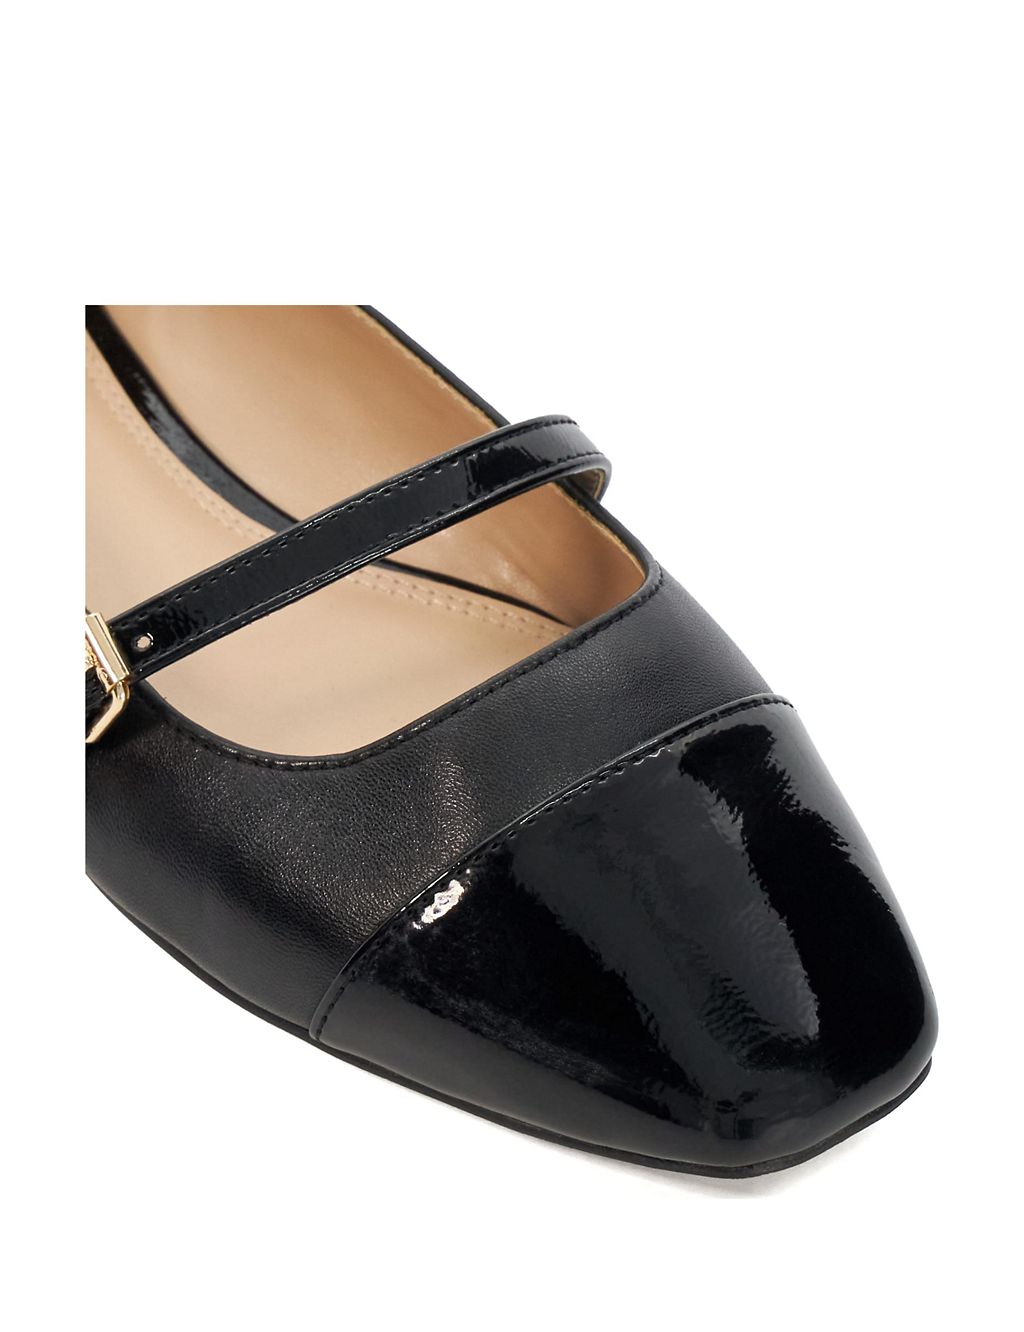 Leather Buckle Flat Ballet Pumps 5 of 5